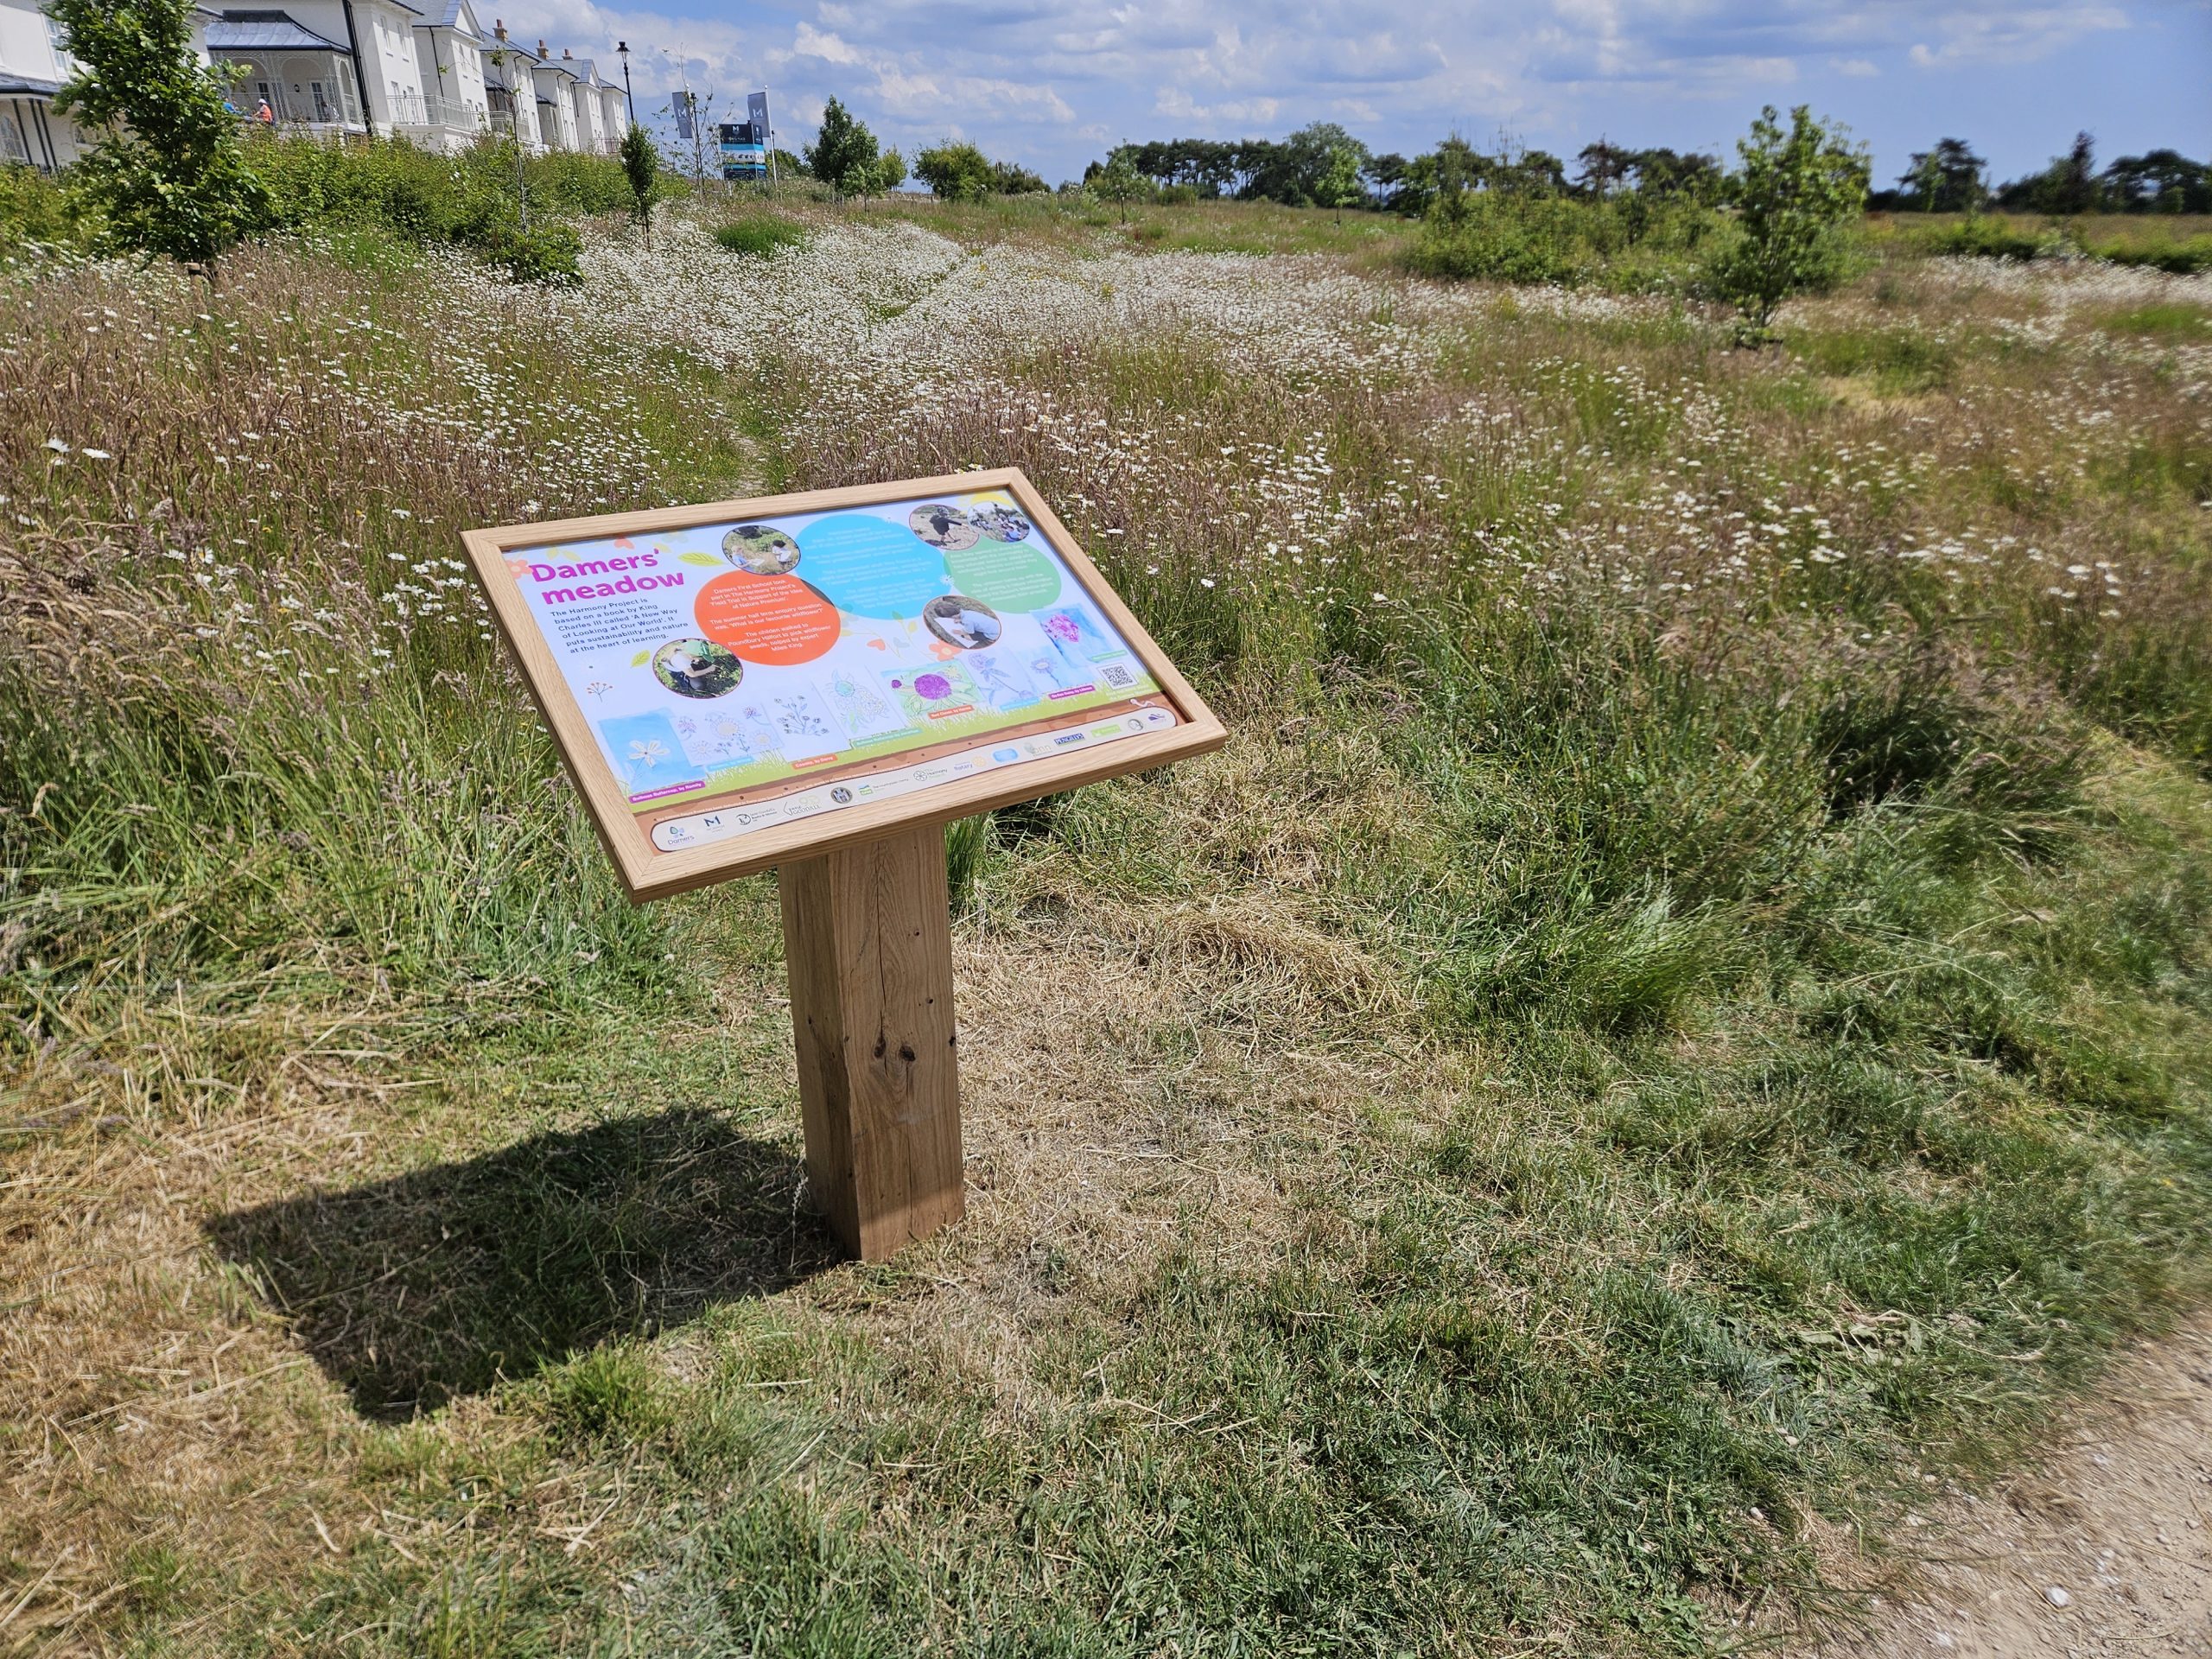 The Meadow Board in-situ with the meadow flowering beautifully in the background.